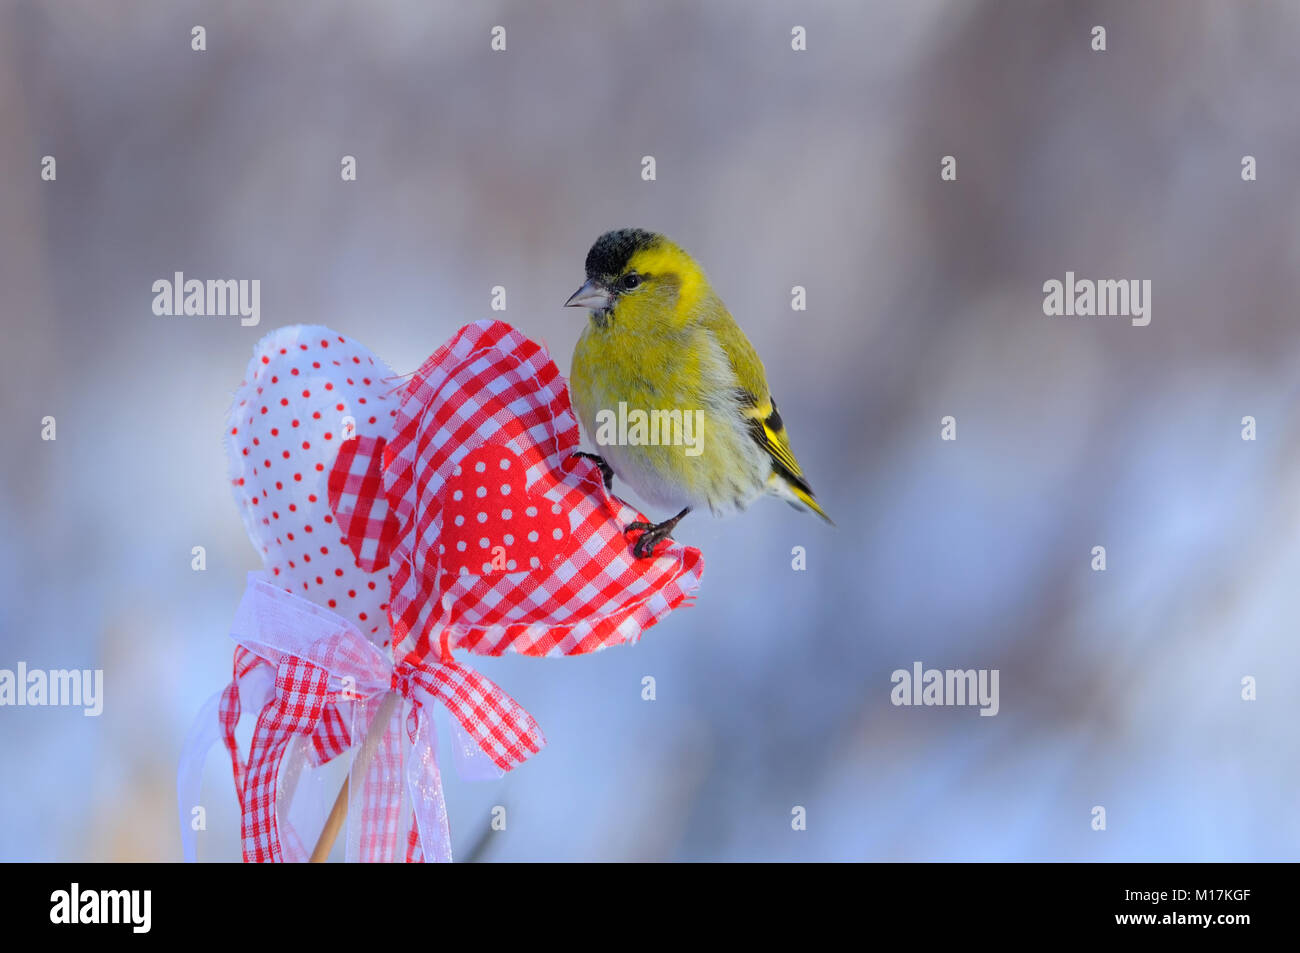 Small eurasian siskin (Spinus spinus) sits on a heart for Valentine's Day with soft dawn background. Stock Photo